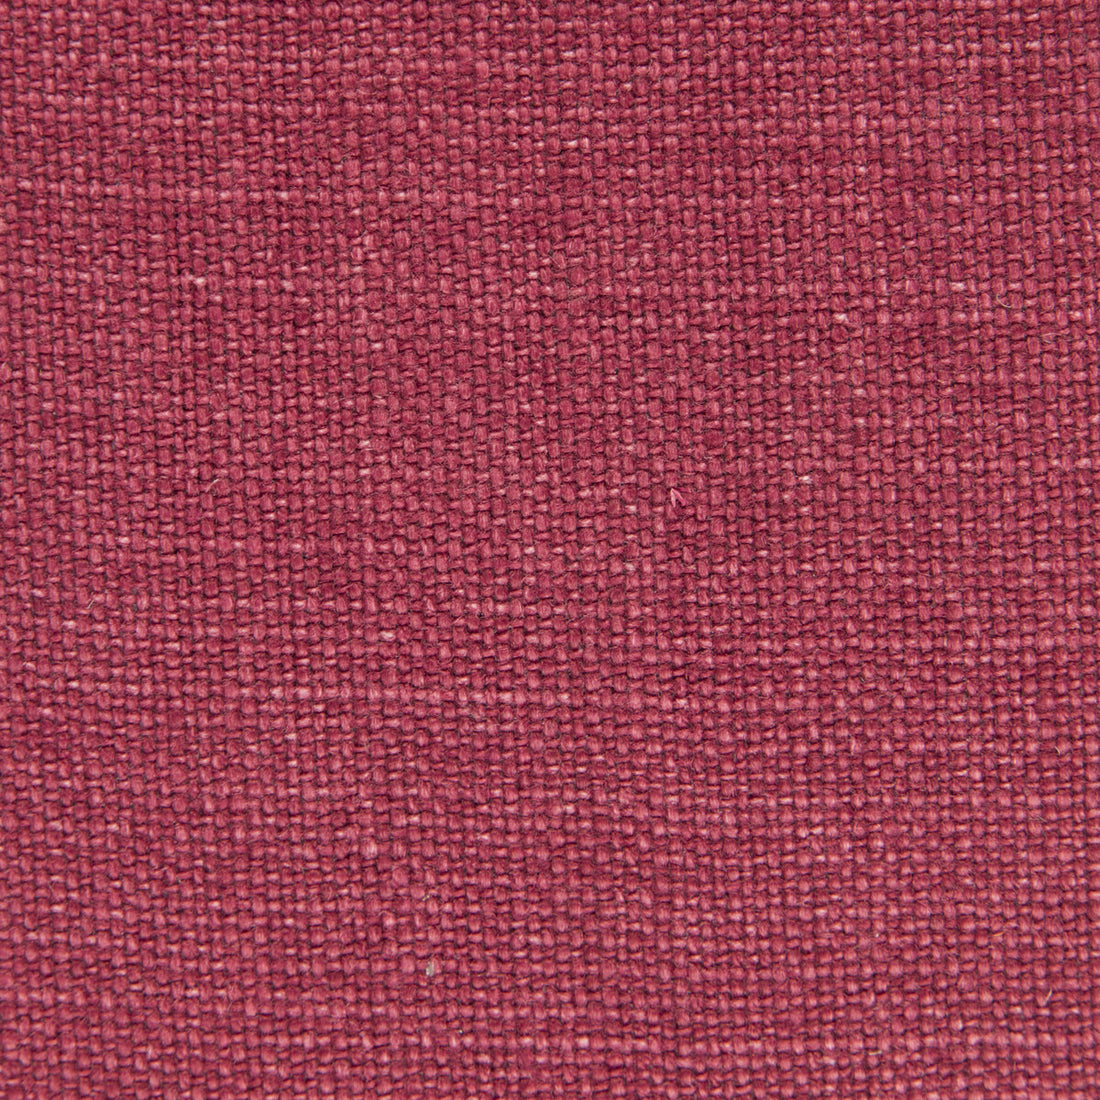 Nicaragua fabric in cereza color - pattern GDT5239.006.0 - by Gaston y Daniela in the Basics collection